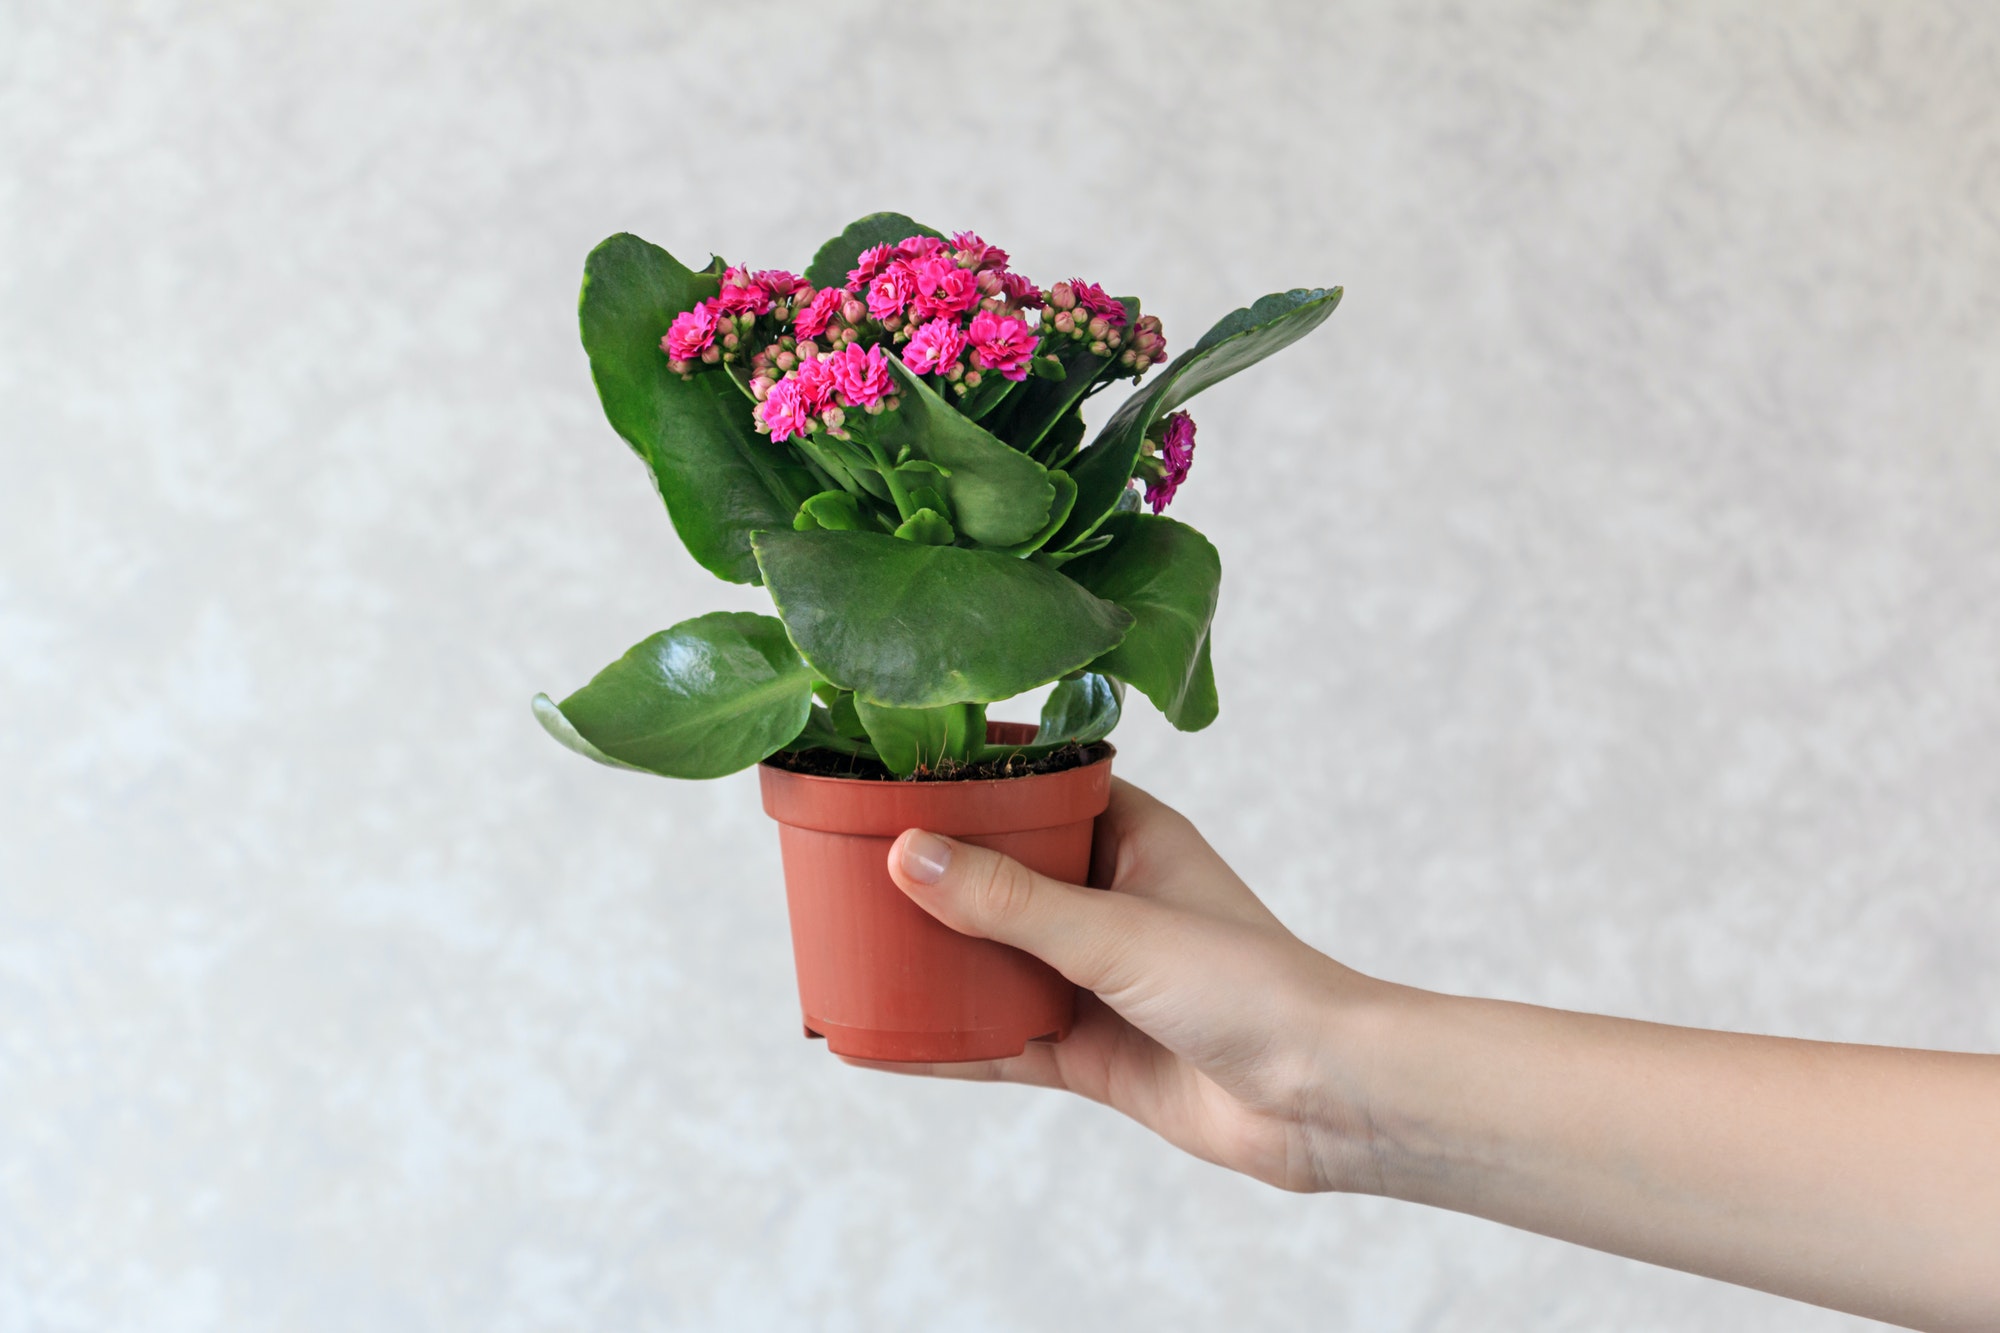 Kalanchoe plant in a pot in hand